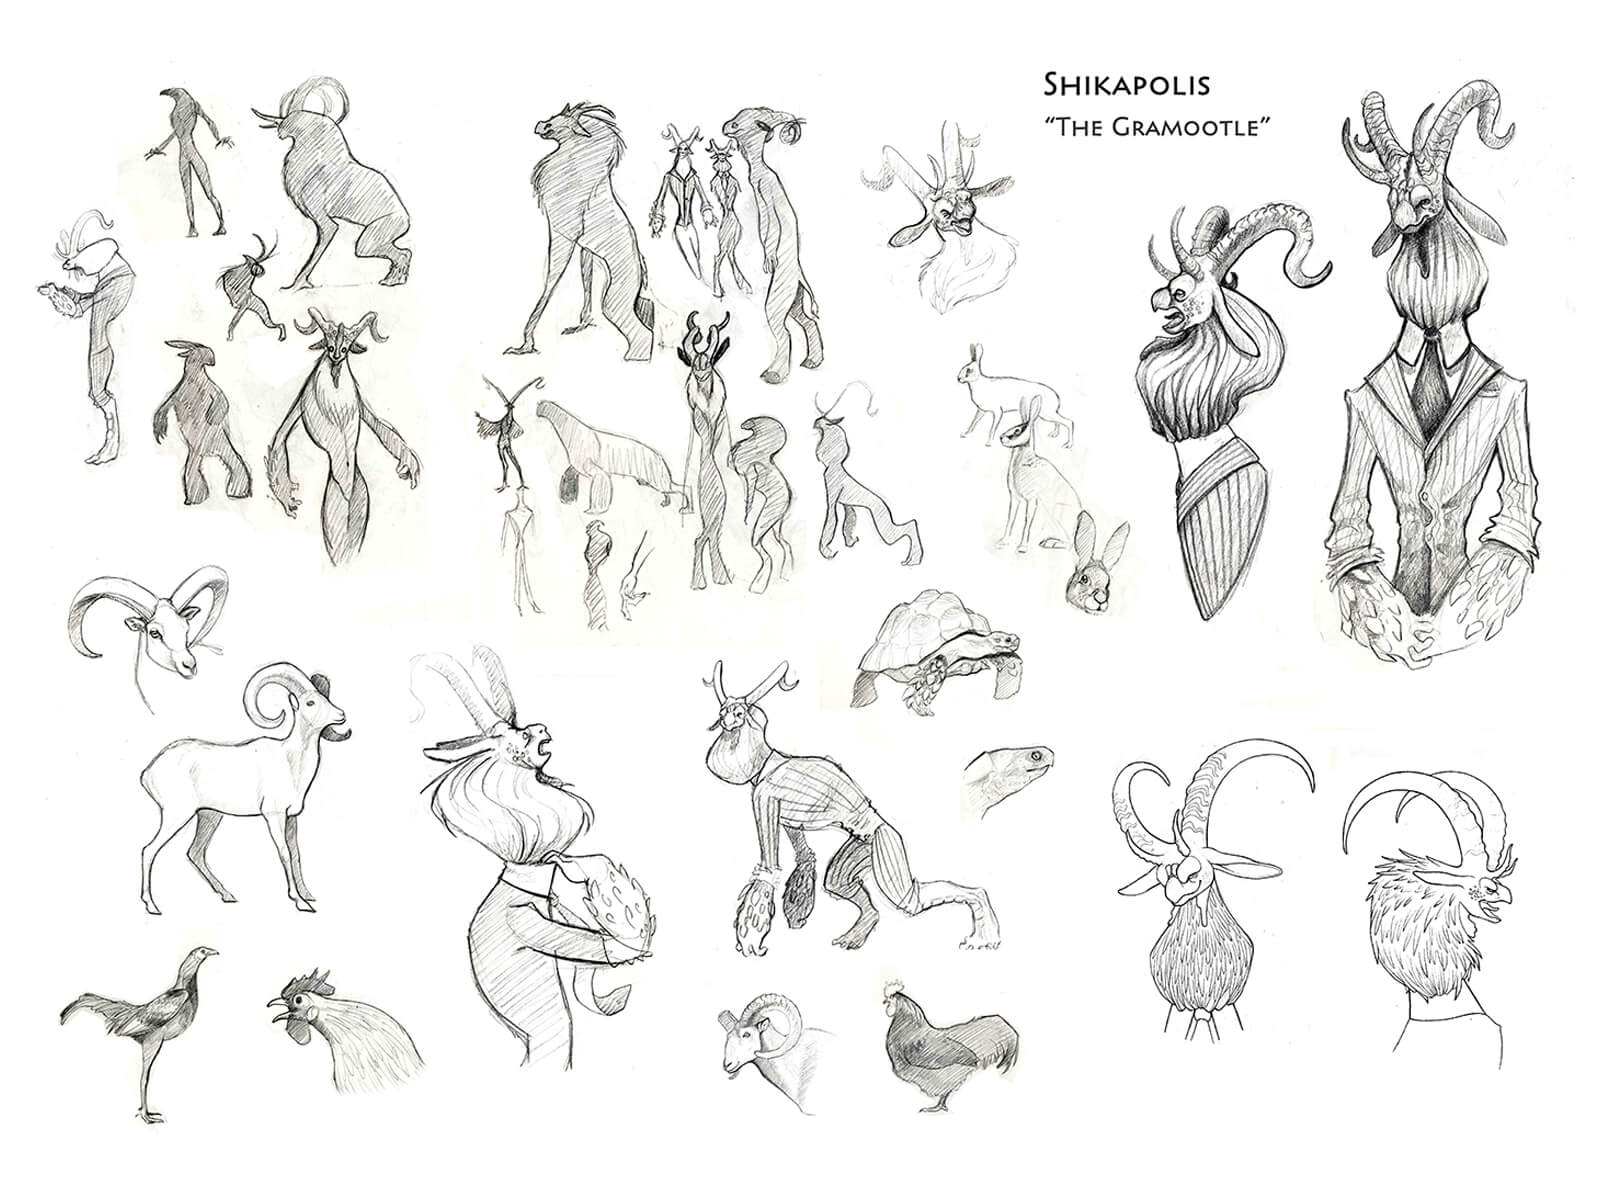 digital painting of a creature resembling an antelope in various poses